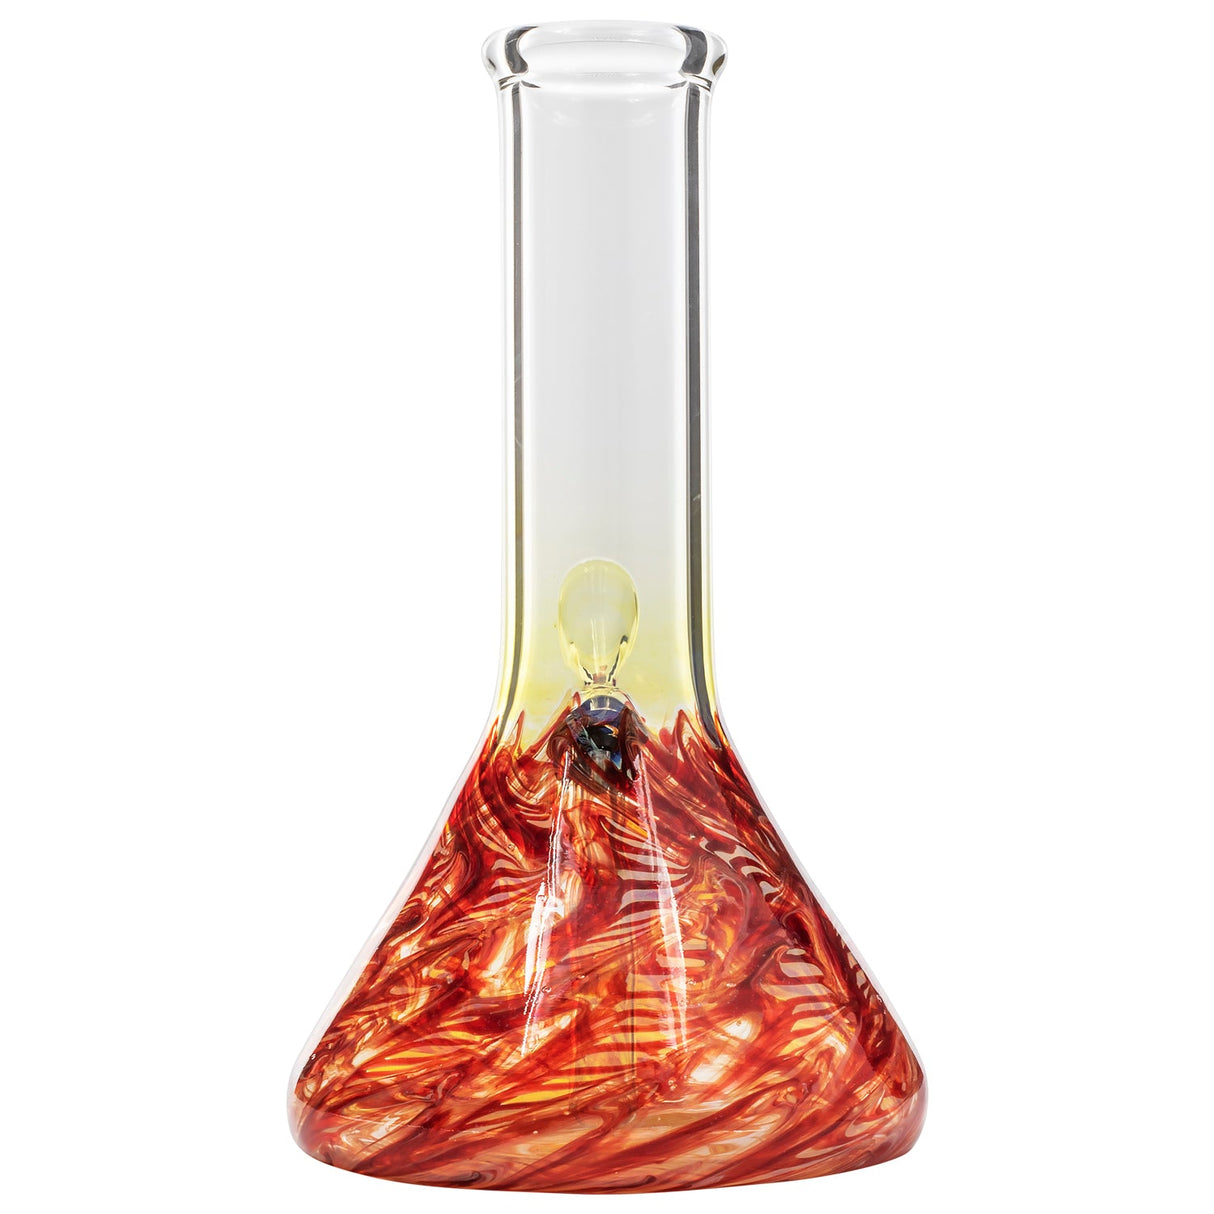 LA Pipes 8" Raked Beaker Water Pipe for Dry Herbs, 38mm Borosilicate Glass, Front View